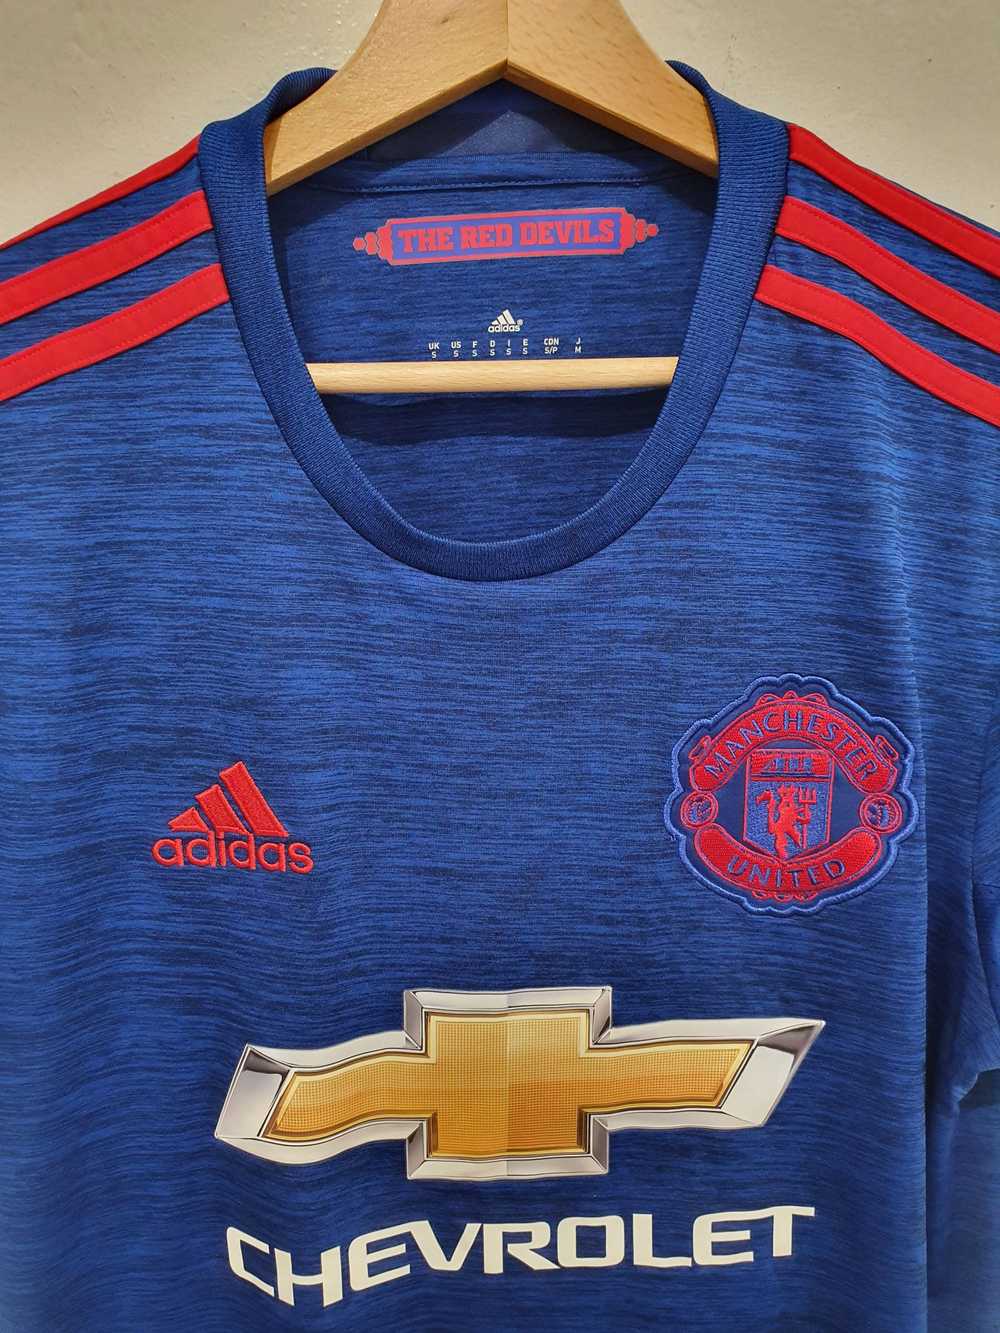 Jersey × Manchester United × Soccer Jersey ADIDAS… - image 3